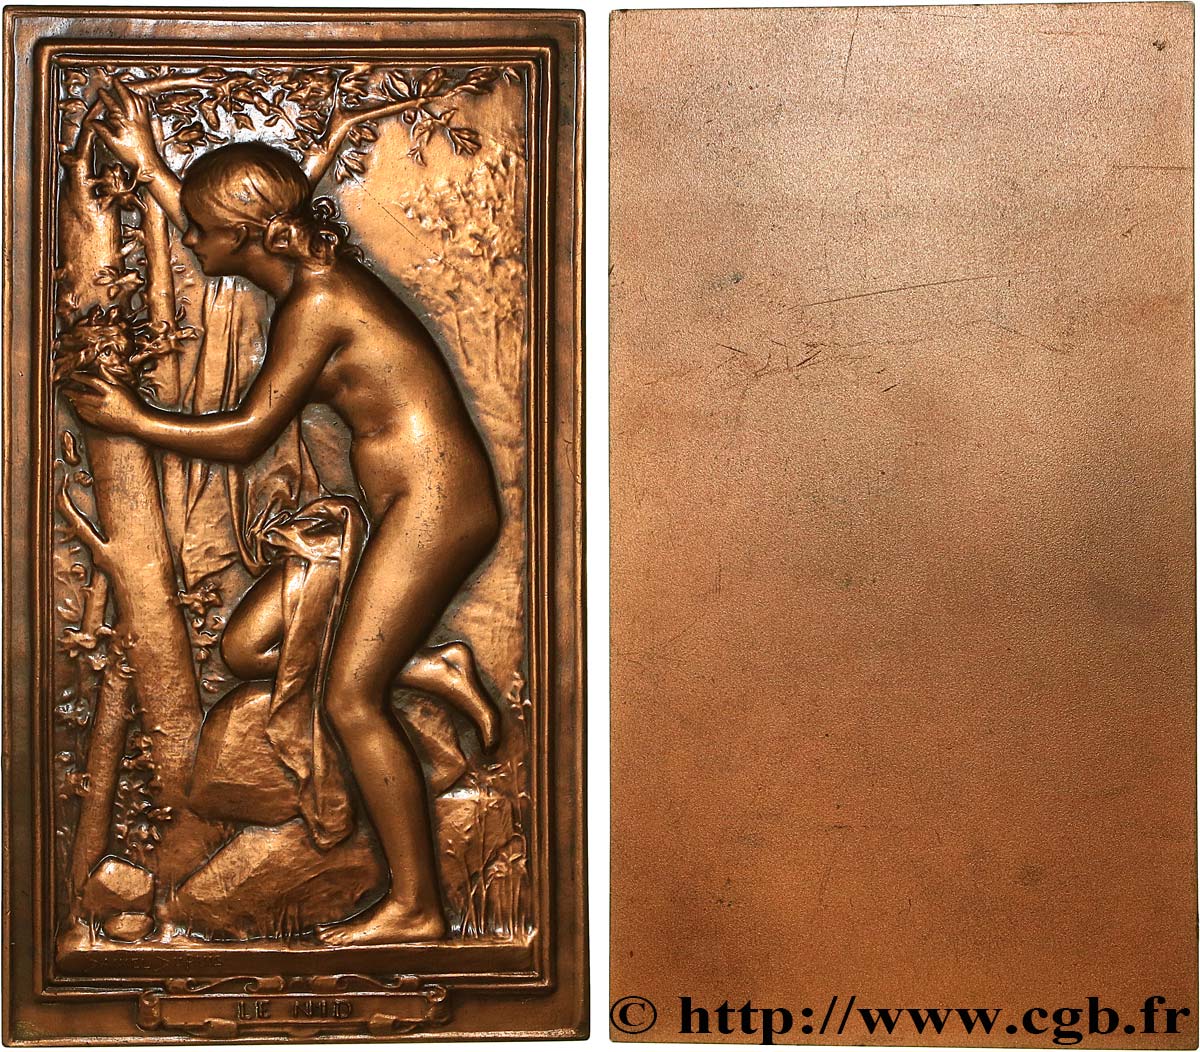 ART, PAINTING AND SCULPTURE Plaque, Le nid, refrappe fVZ